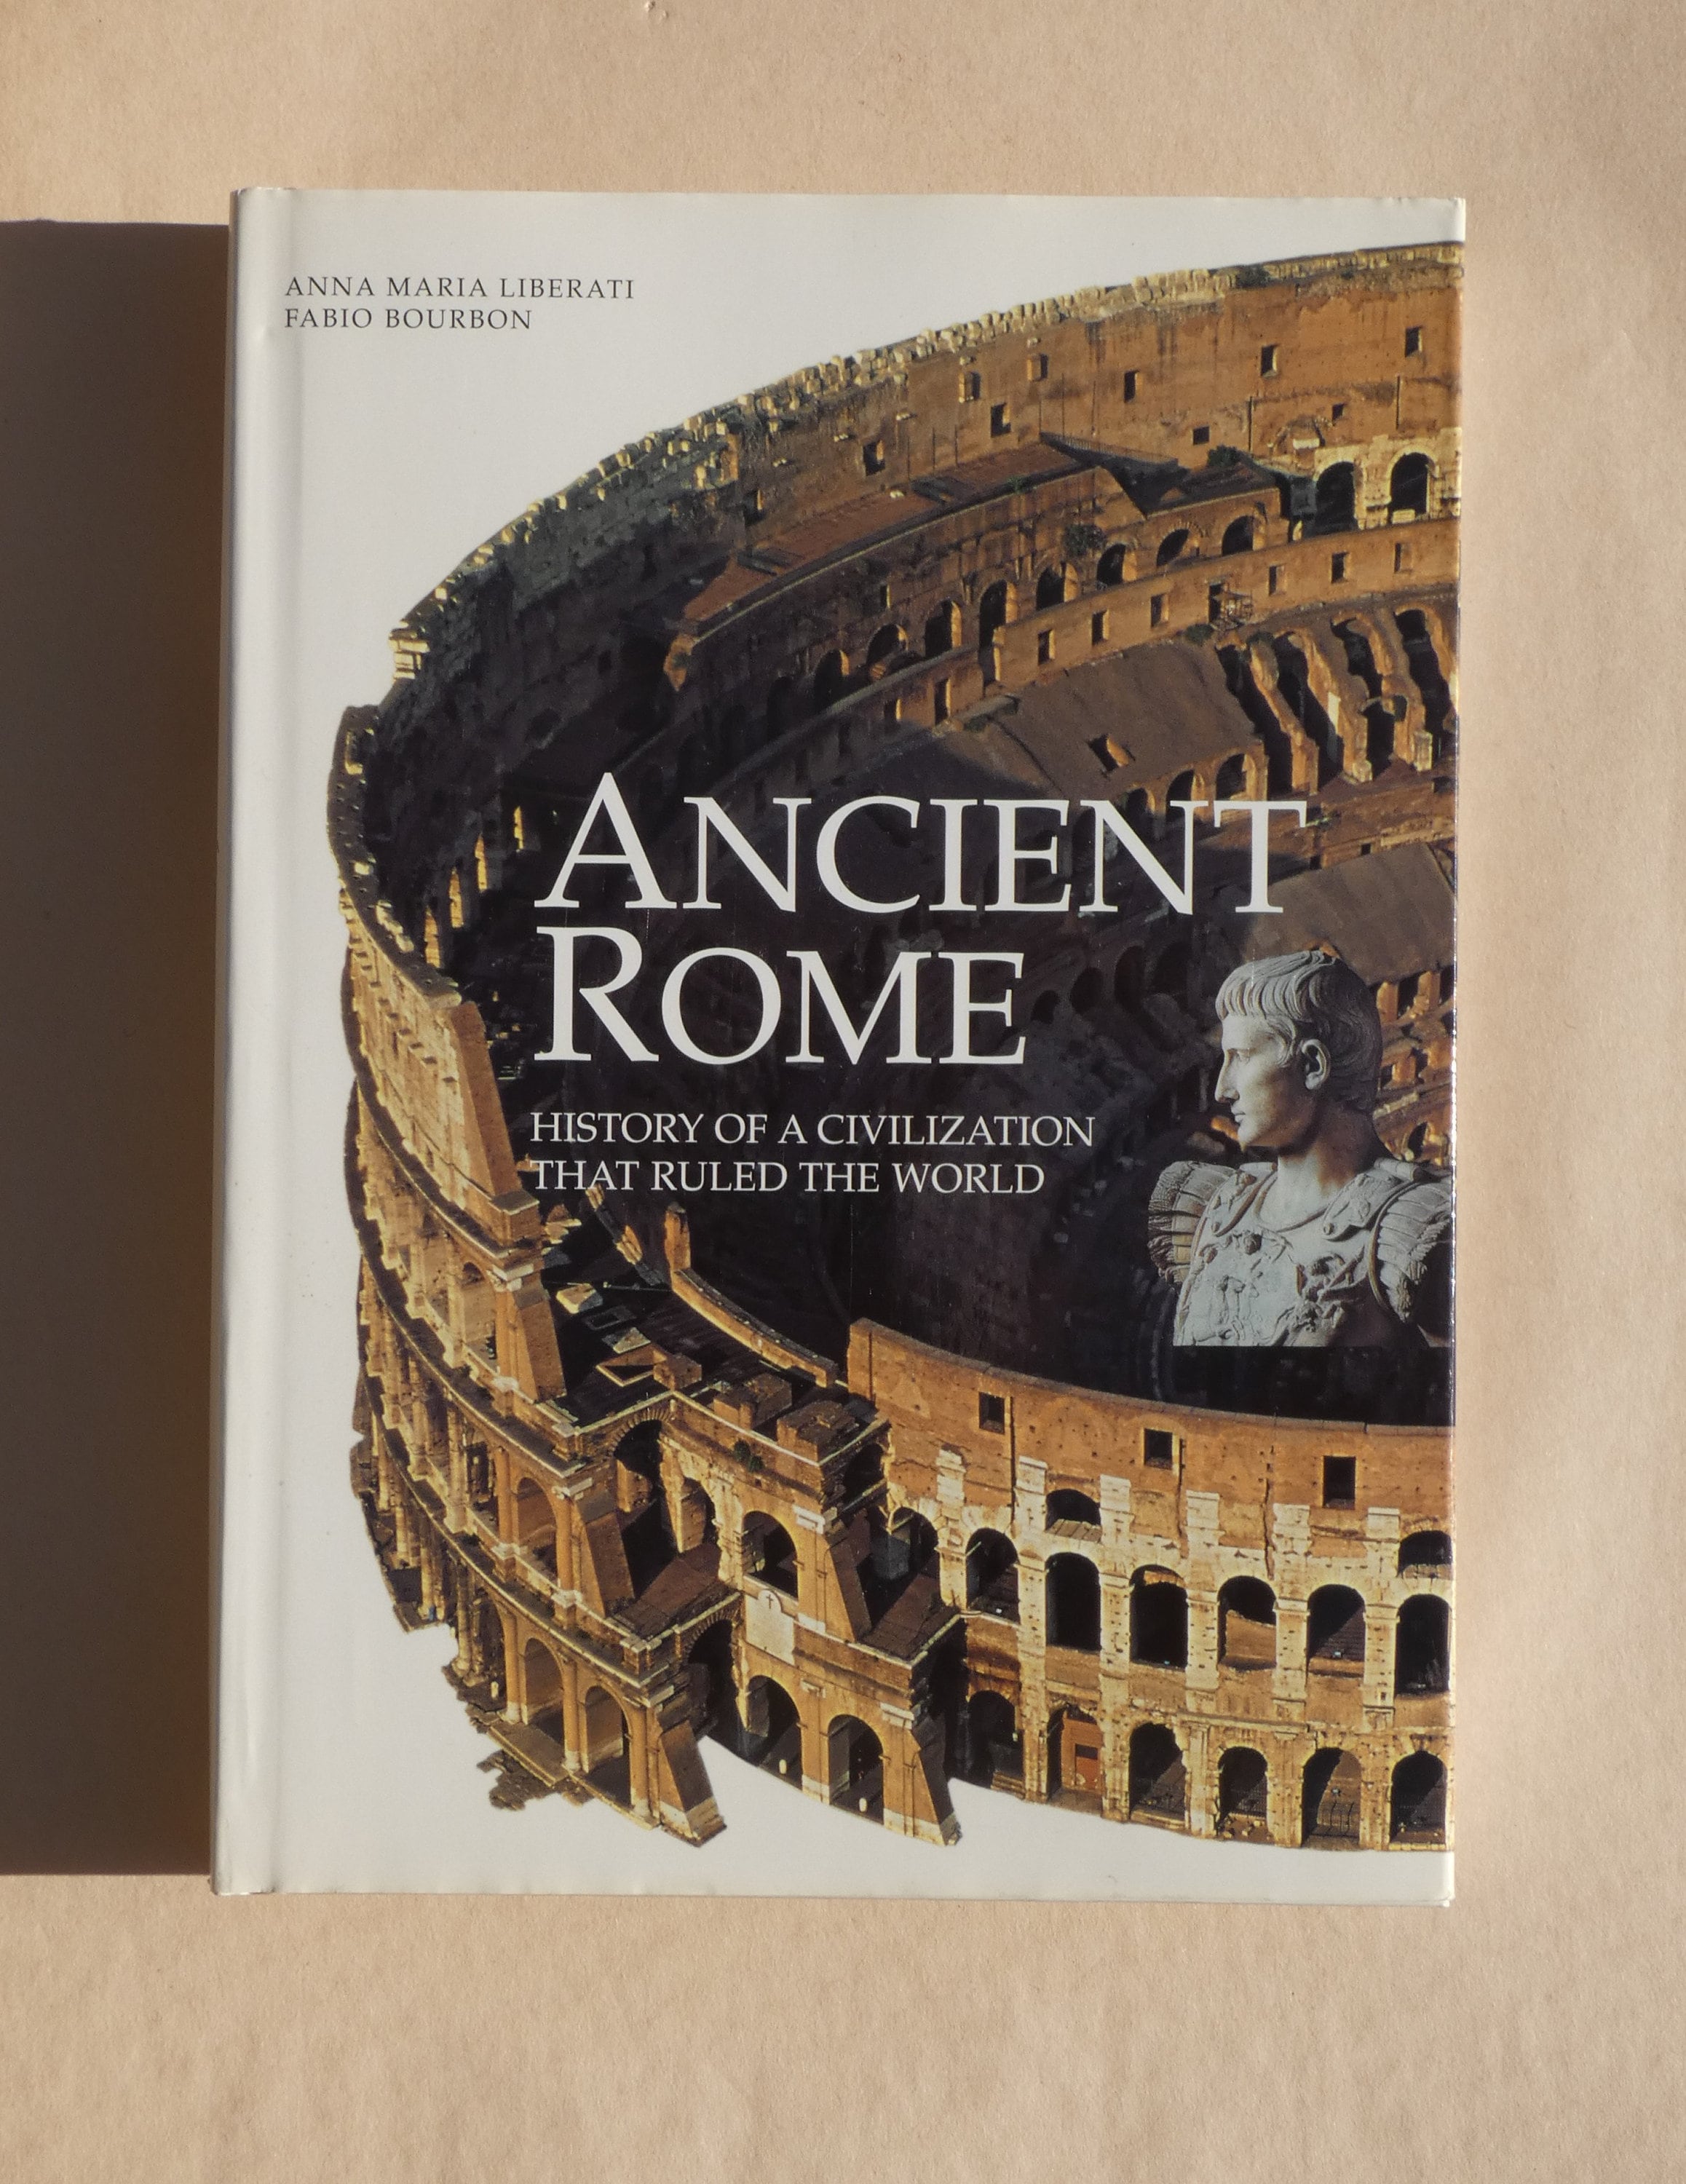 of　Ruled　Civilization　History　Etsy　the　Rome:　That　a　Ancient　World